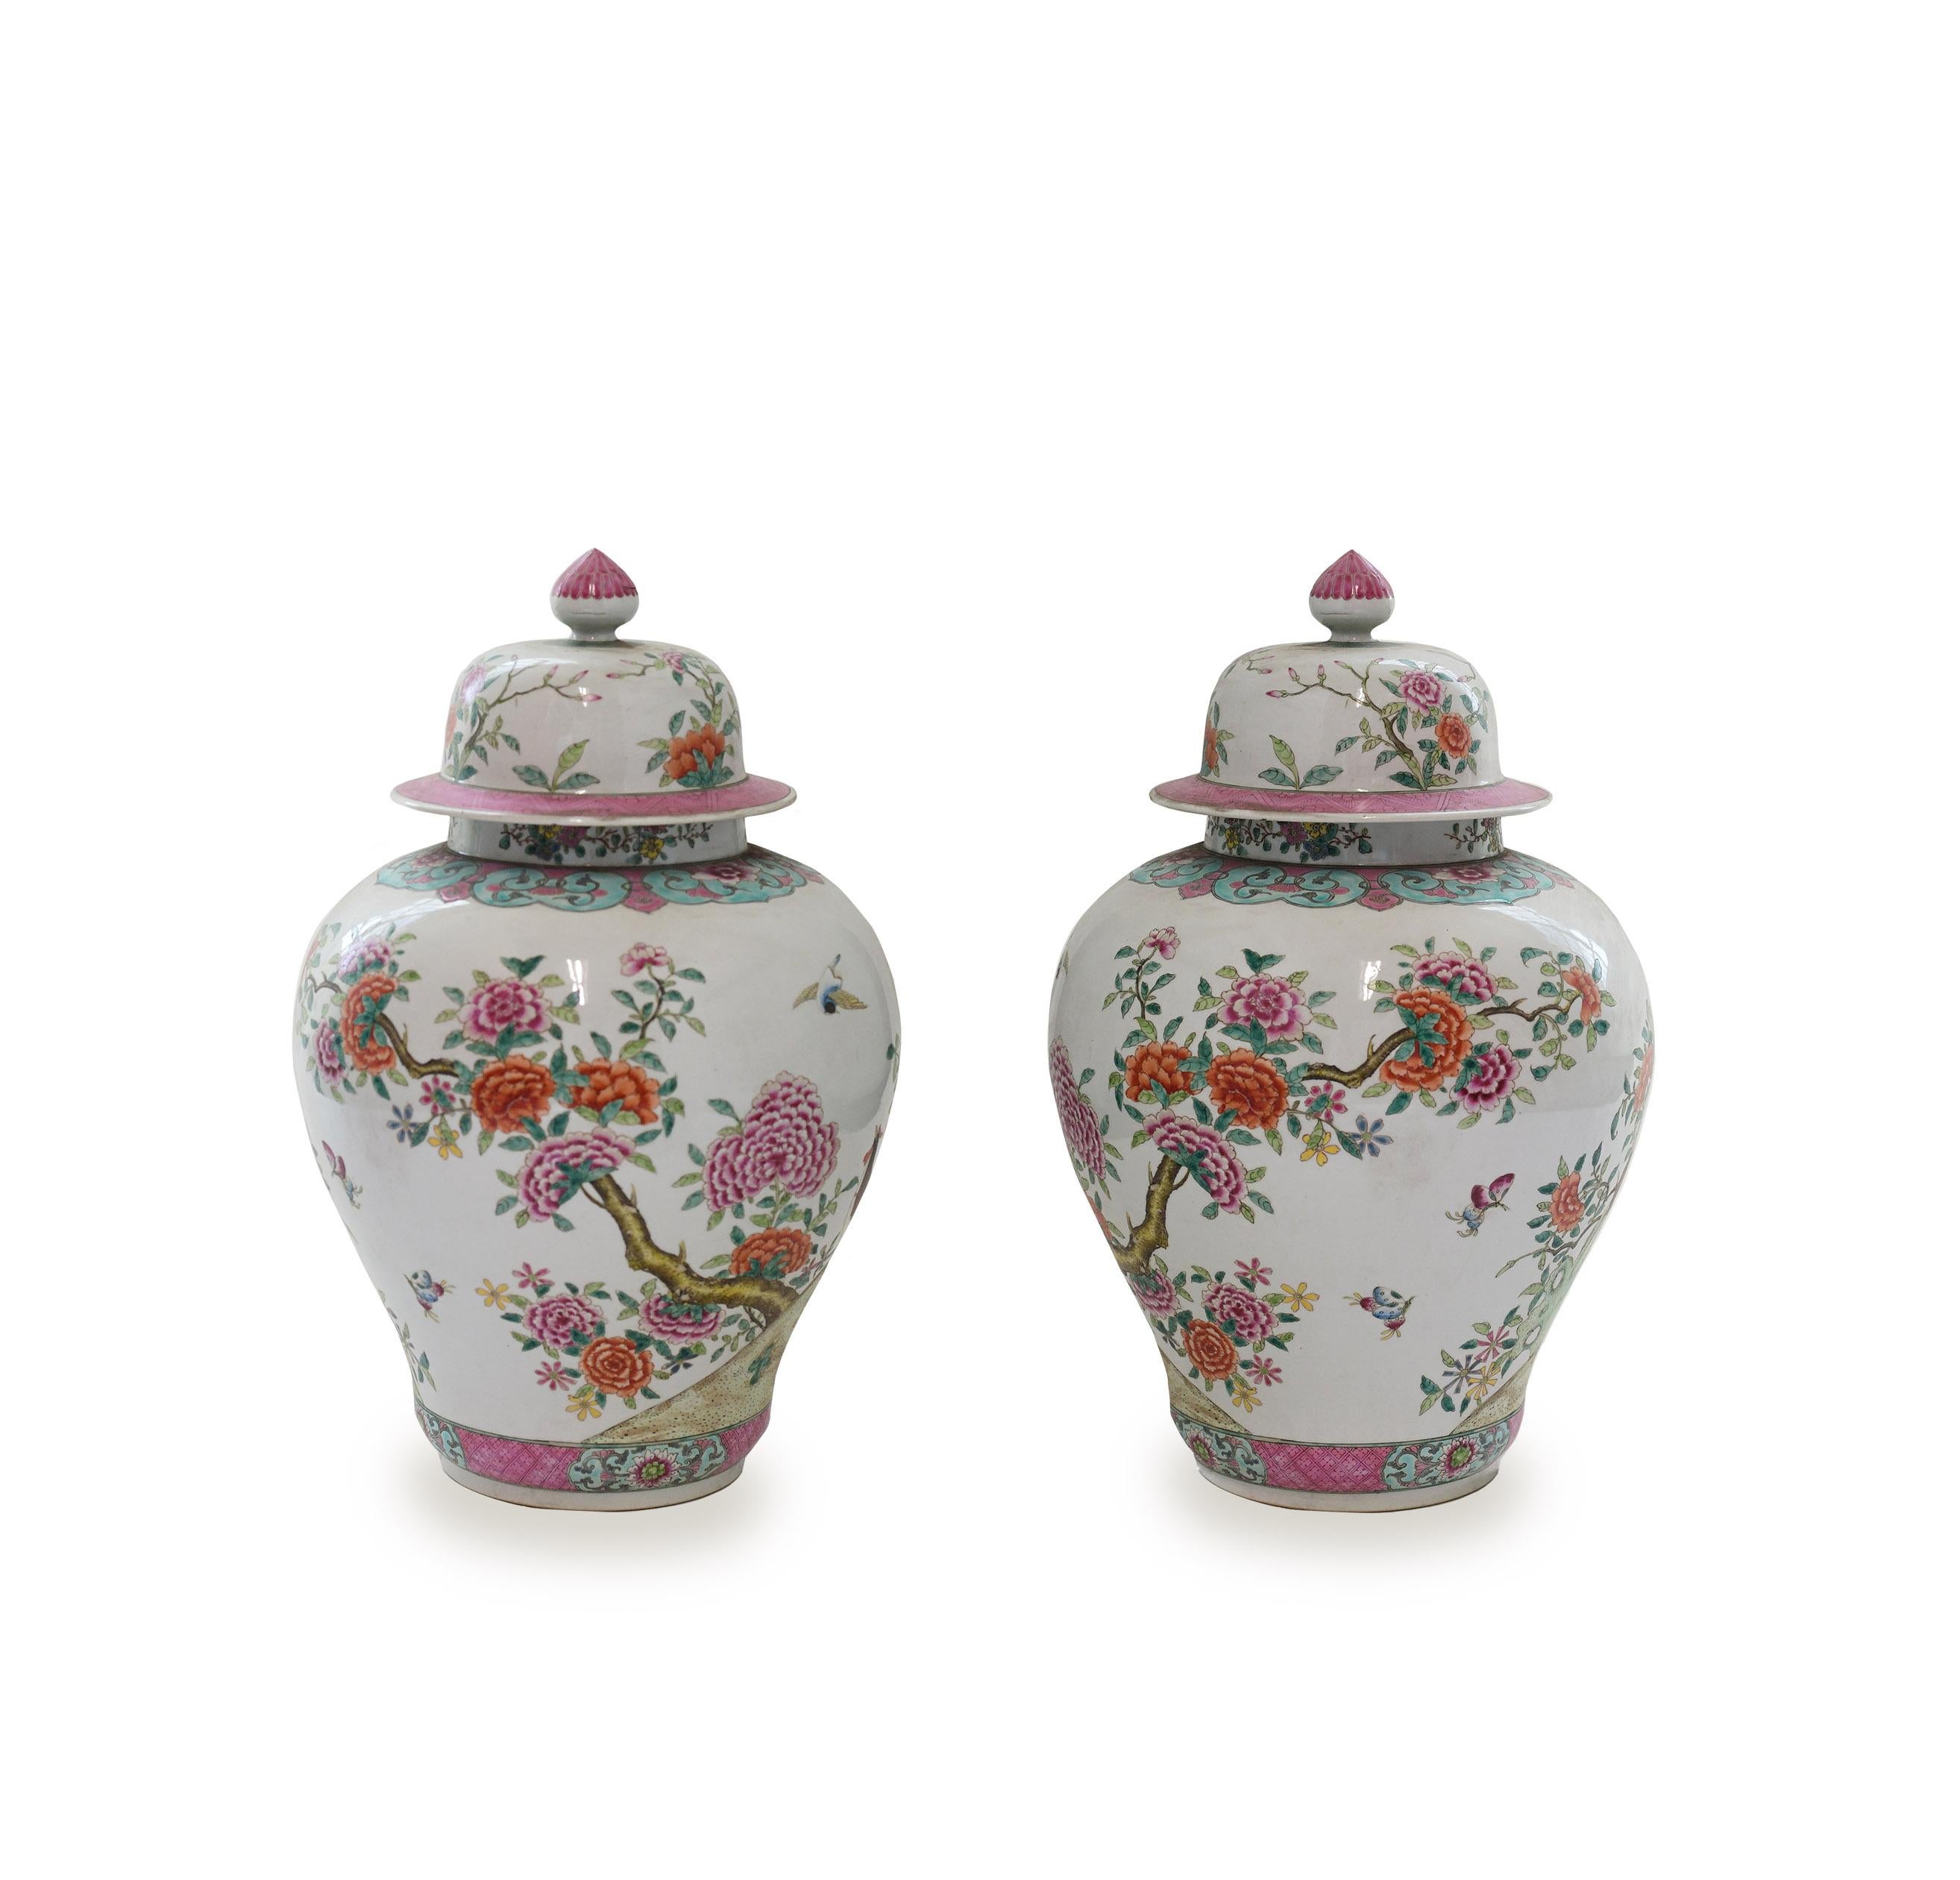 Fine painted porcelain vases with flowers bloom decoration.
The bottom of the porcelain is 7.5 in/D.